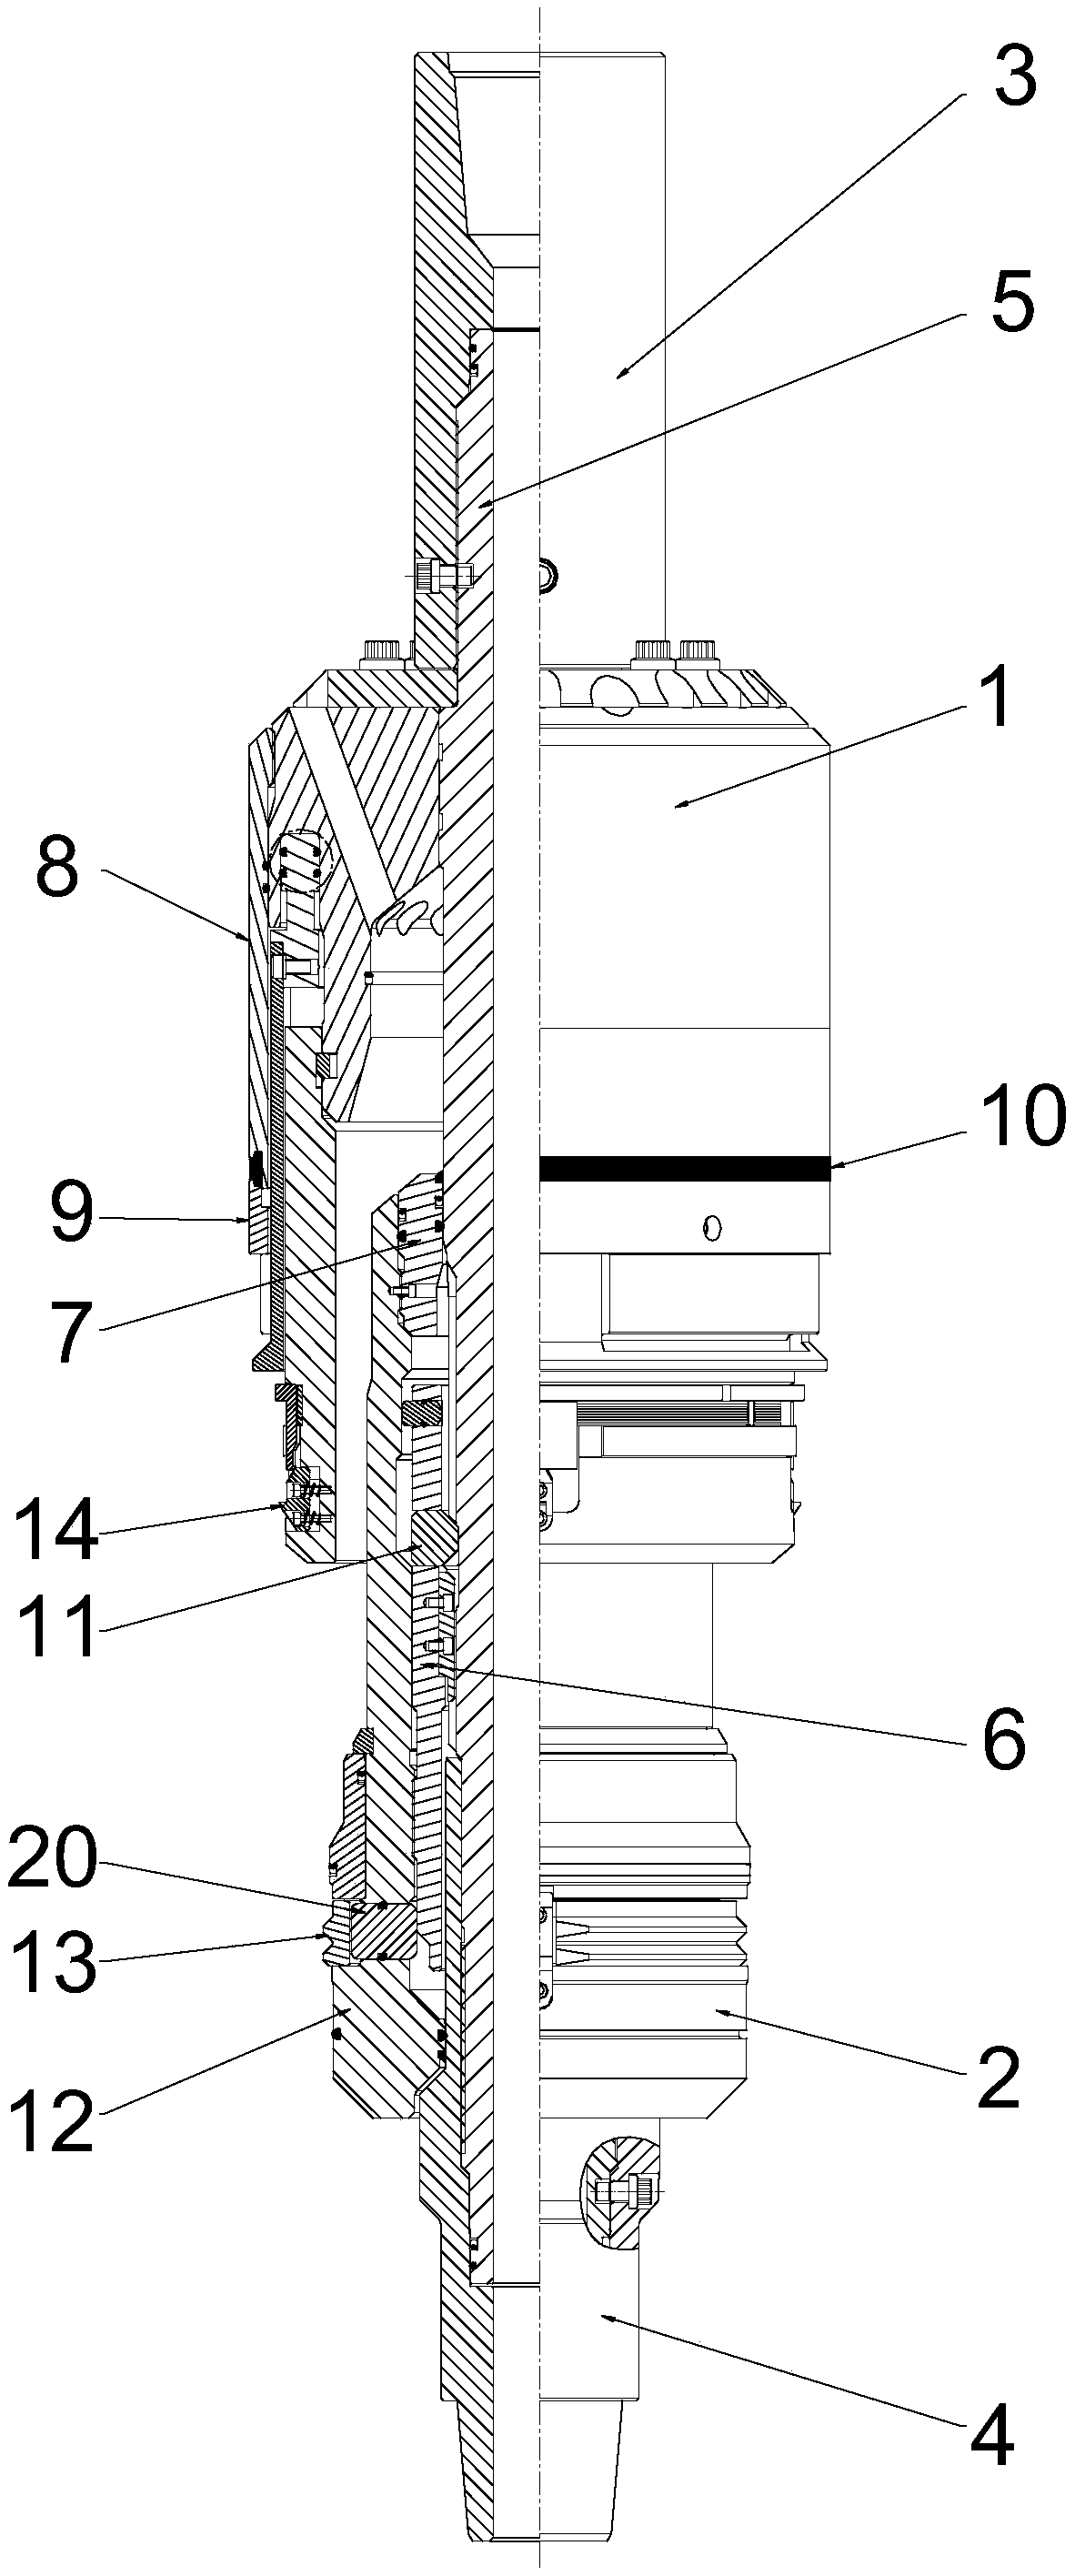 Single-pass running tool and method for casing hanger and sealing assembly for underwater wellhead